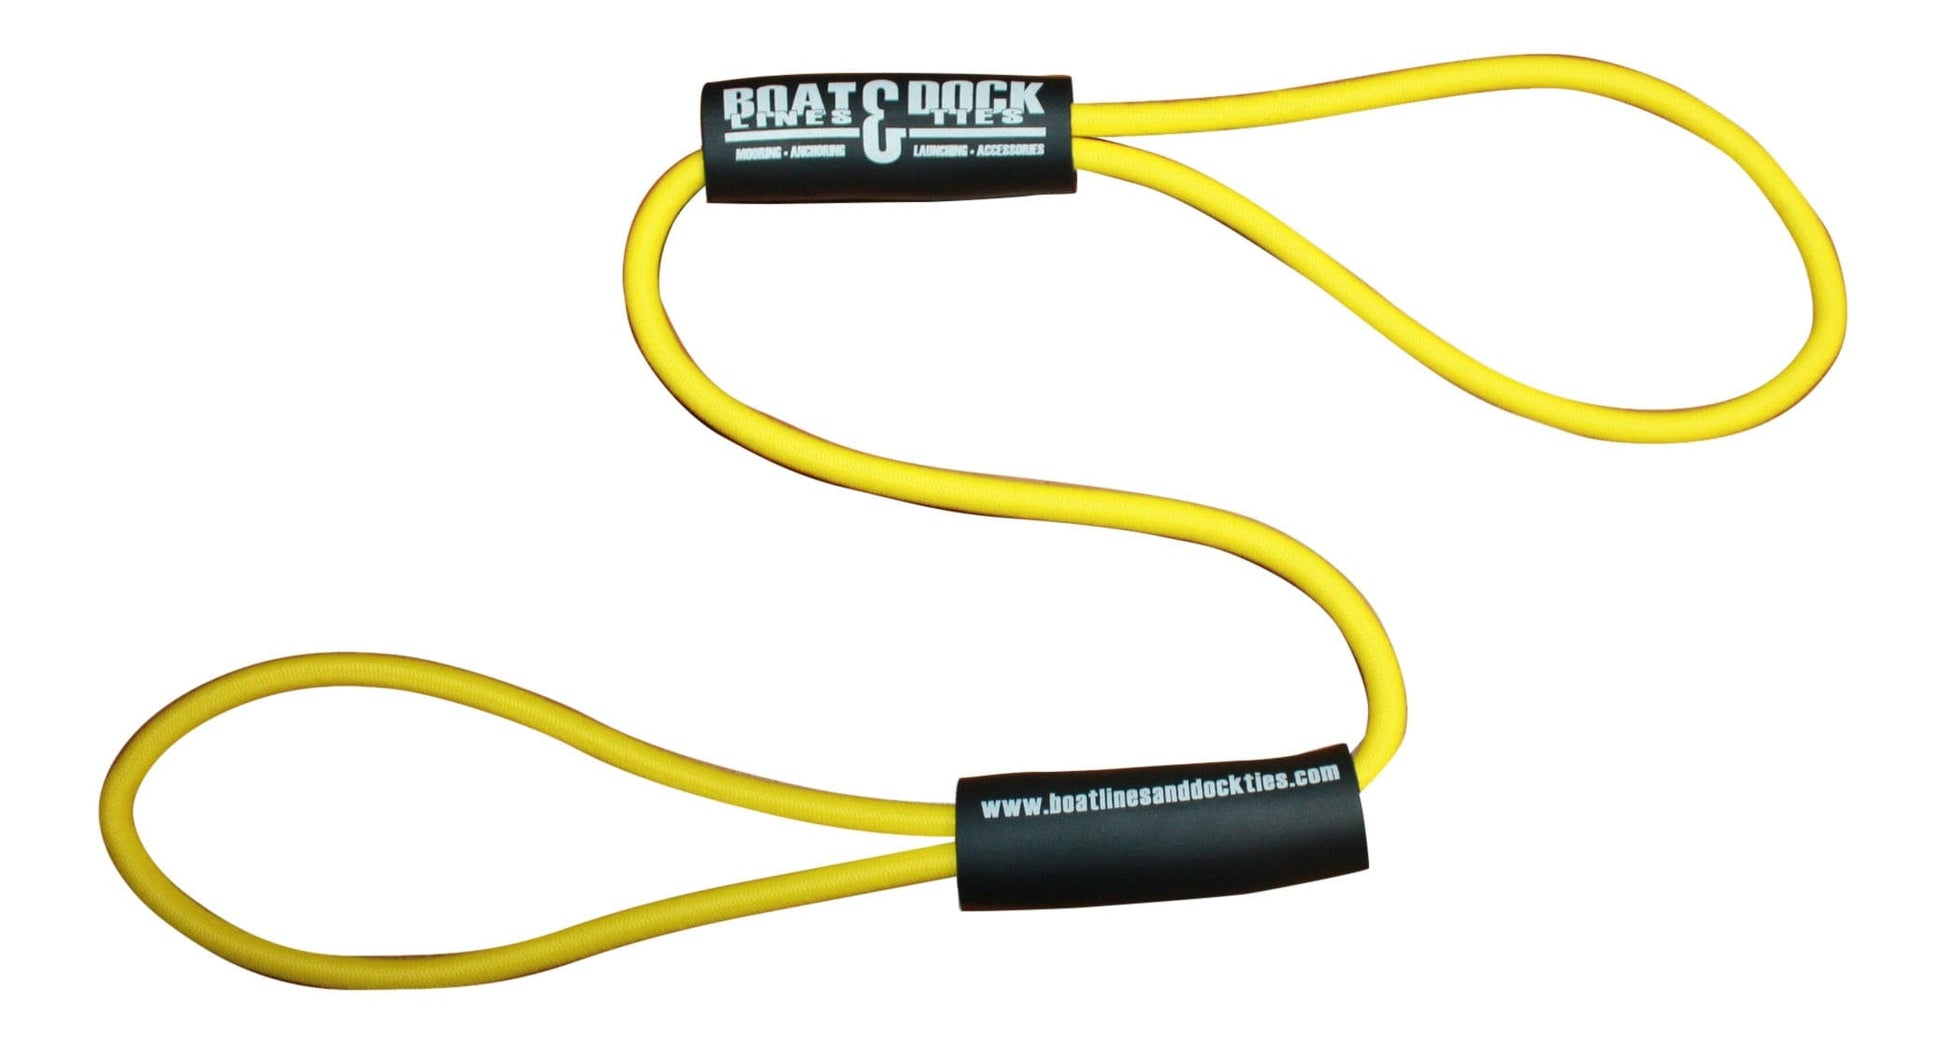 Basic Bungee Boat Dock Ties with Floats - 2 pair pack - Boat Lines & Dock Ties Boat Lines & Dock Ties 36 Inch / Yellow